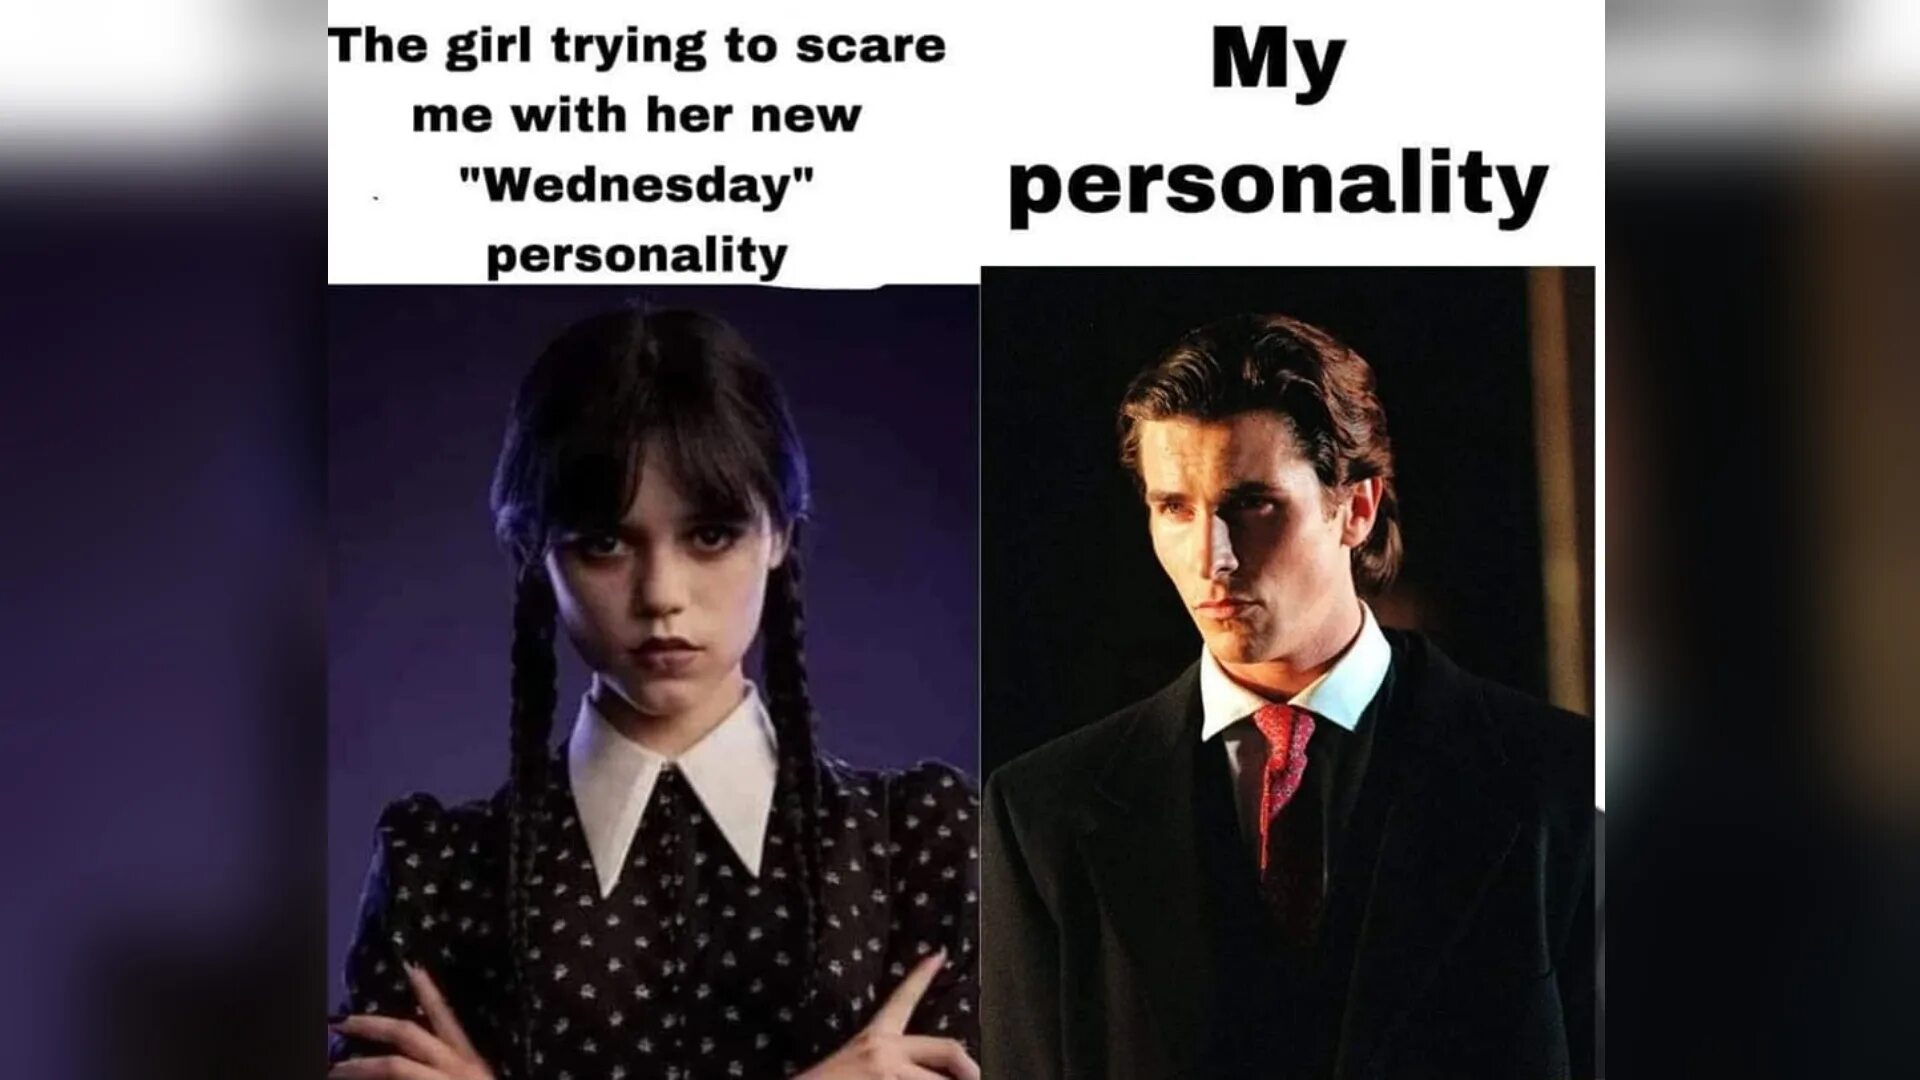 She tried her best but. The girl trying to Scare me with her New Wednesday personality. Венздей. Her New Wednesday personality. Personality Мем.